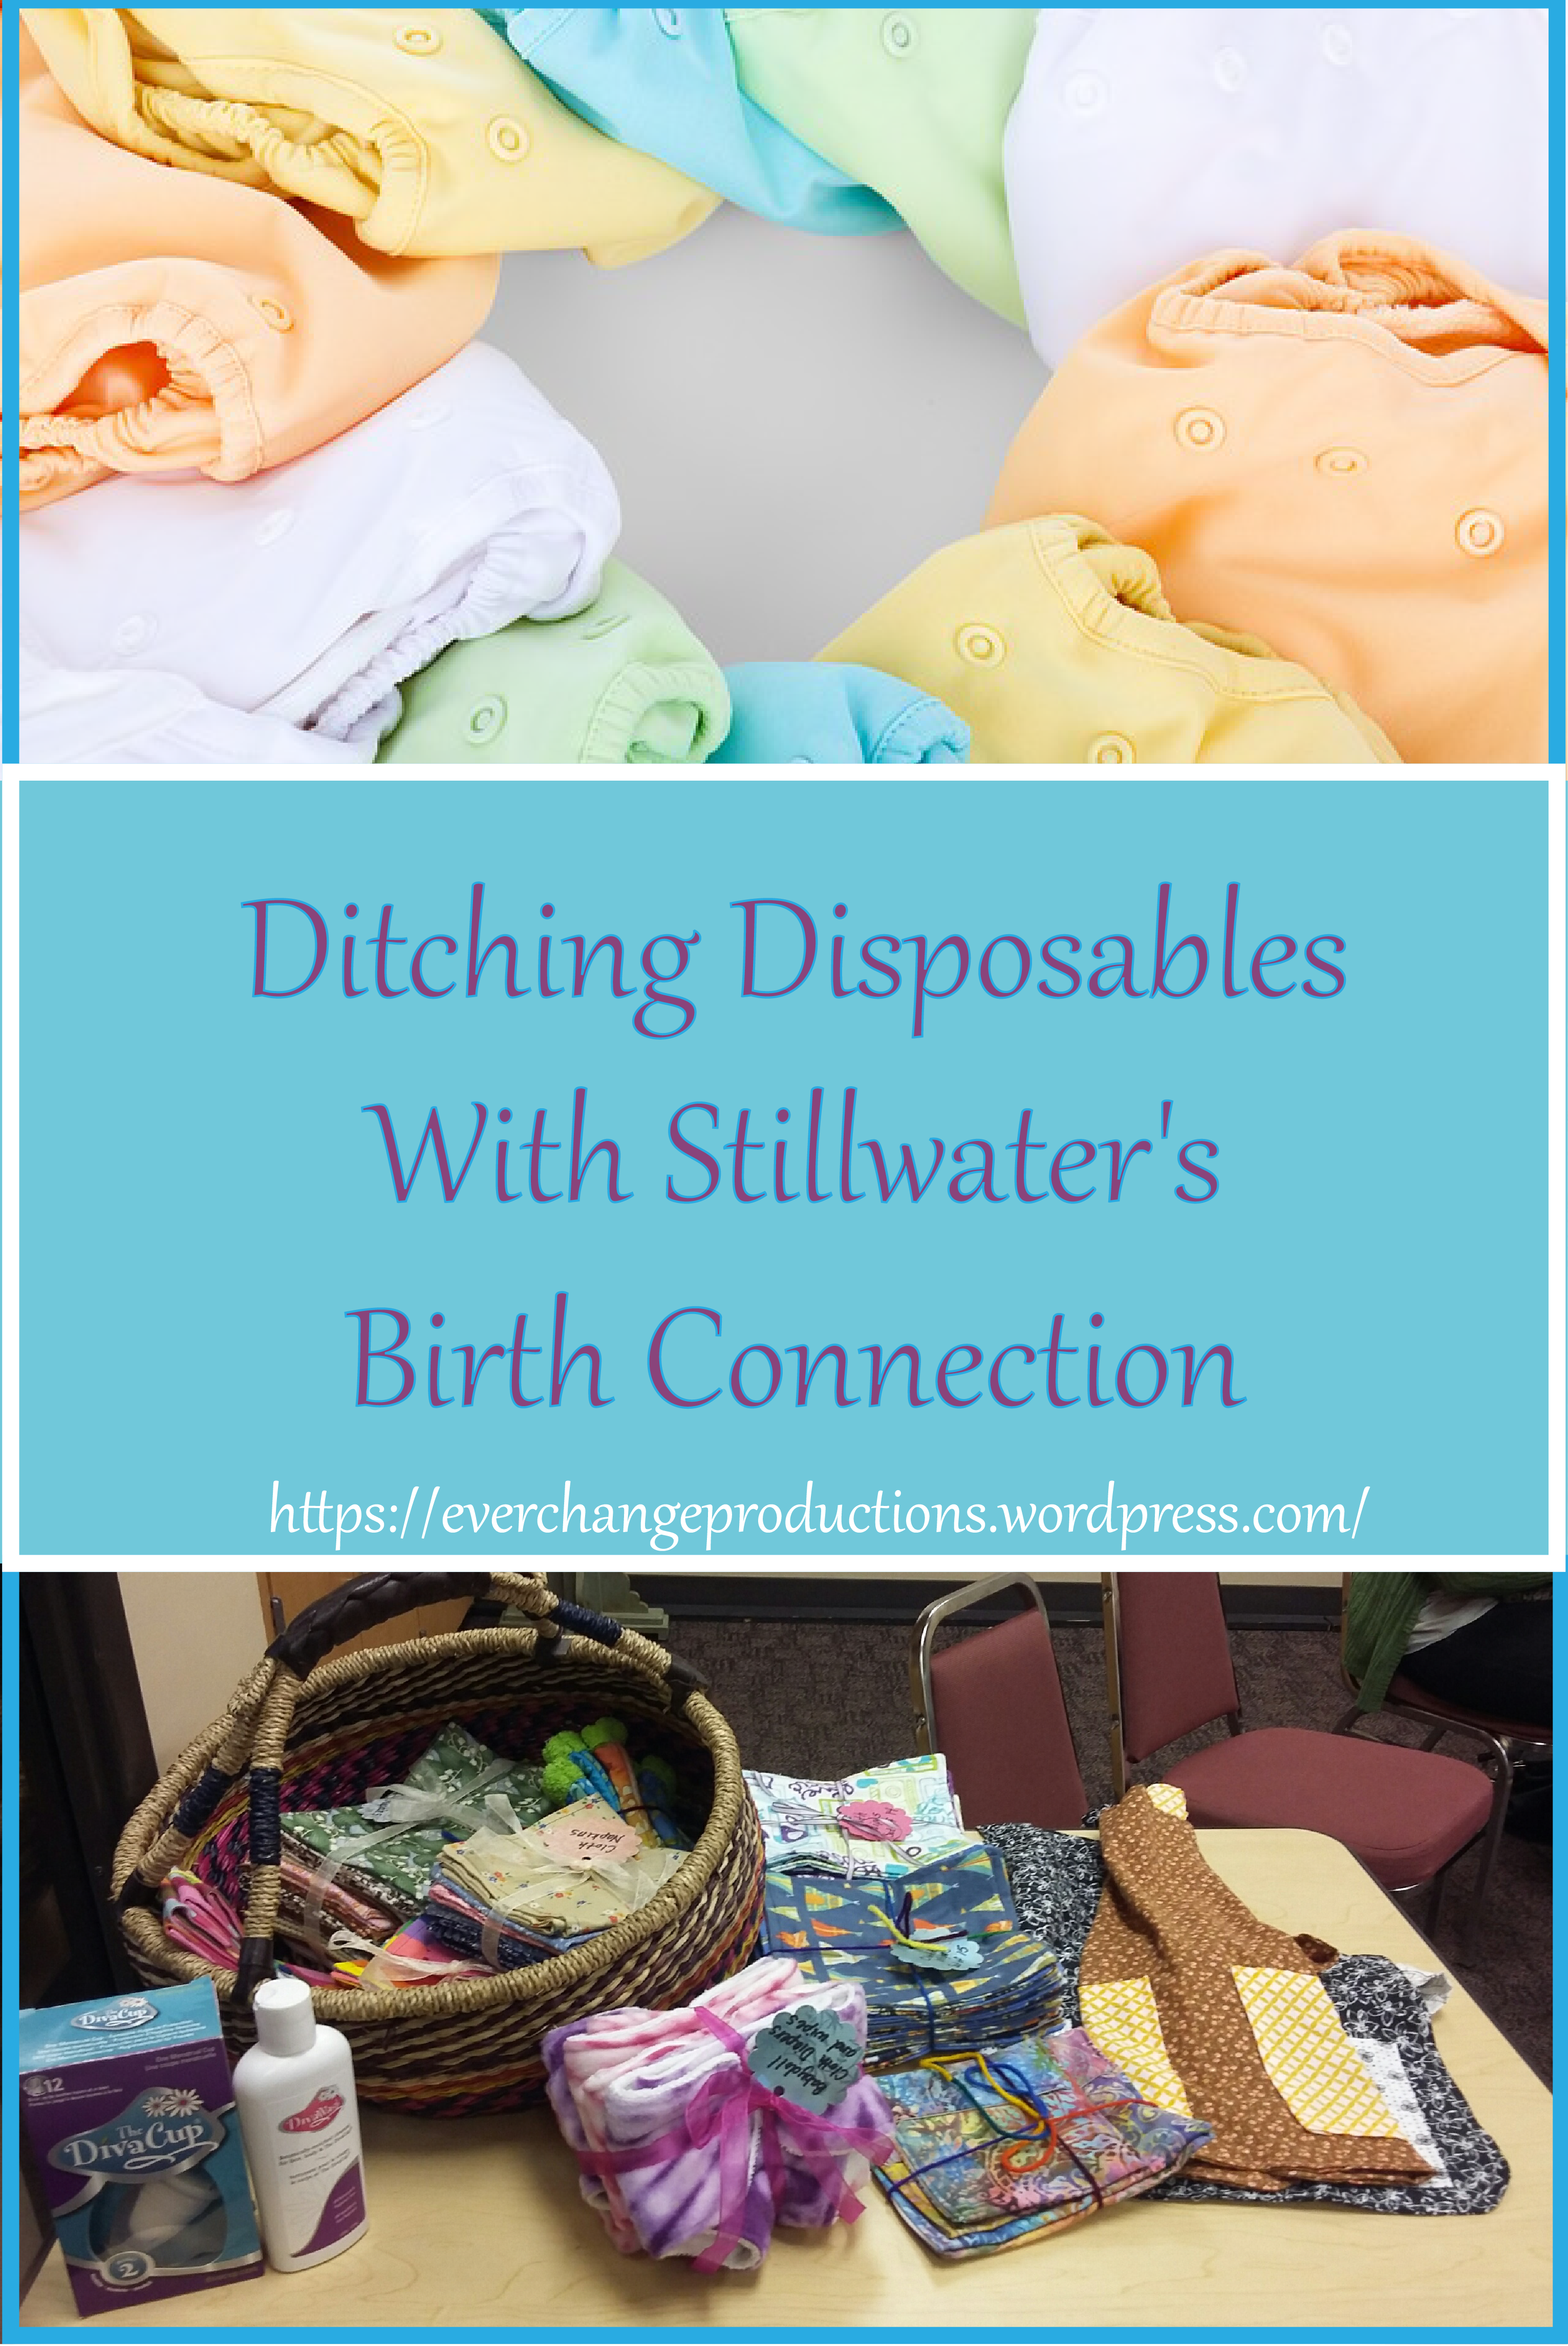 Ditching Disposables with Stillwater's Birth Connection